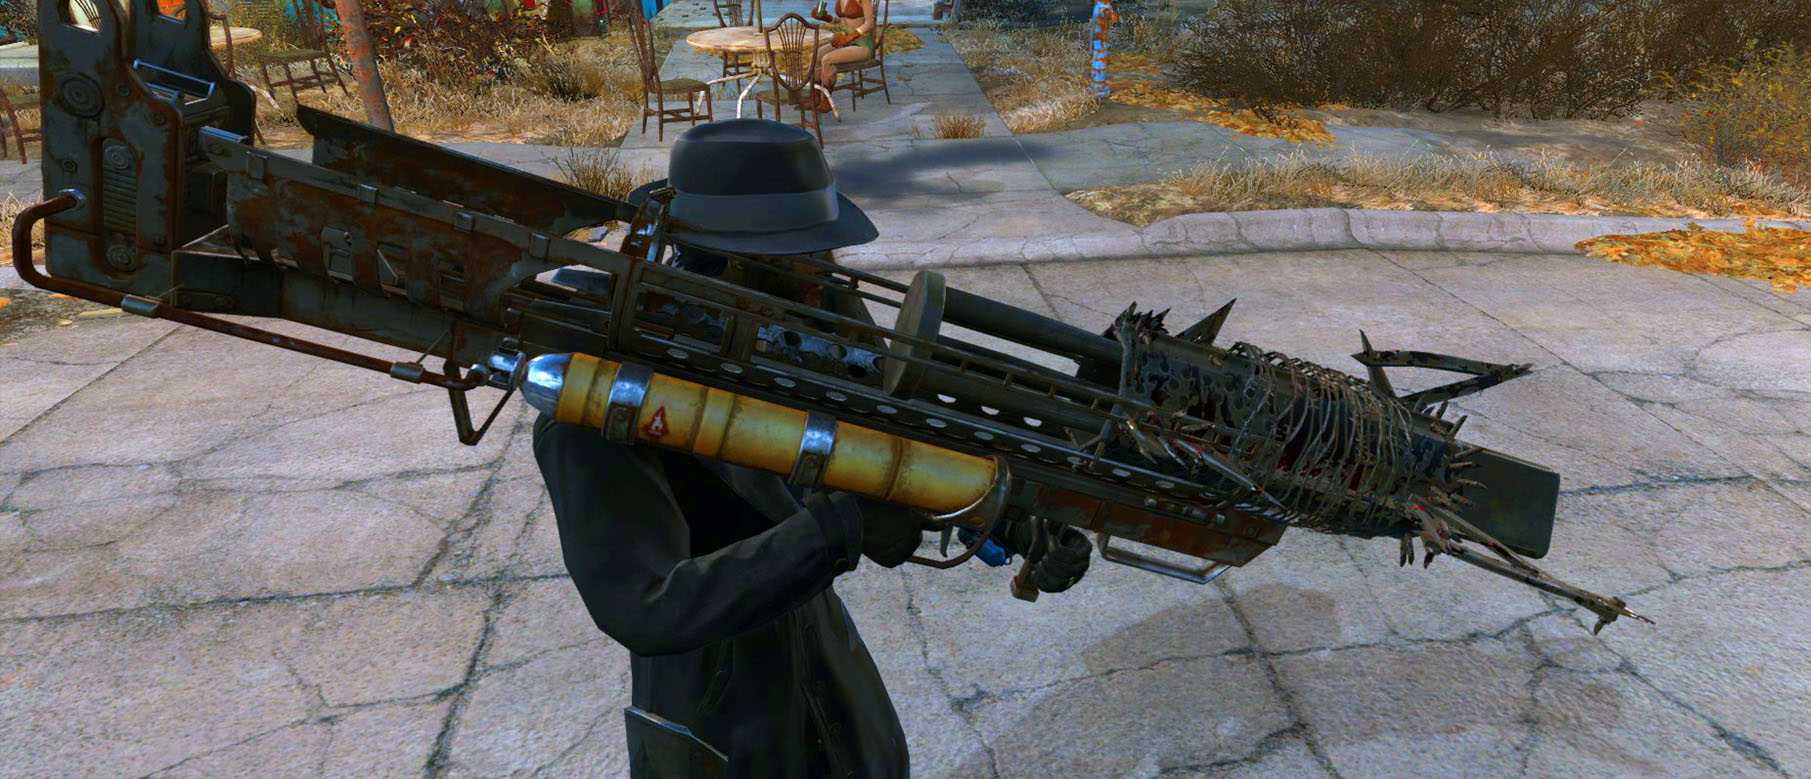 All legendary weapon fallout 4 фото 110